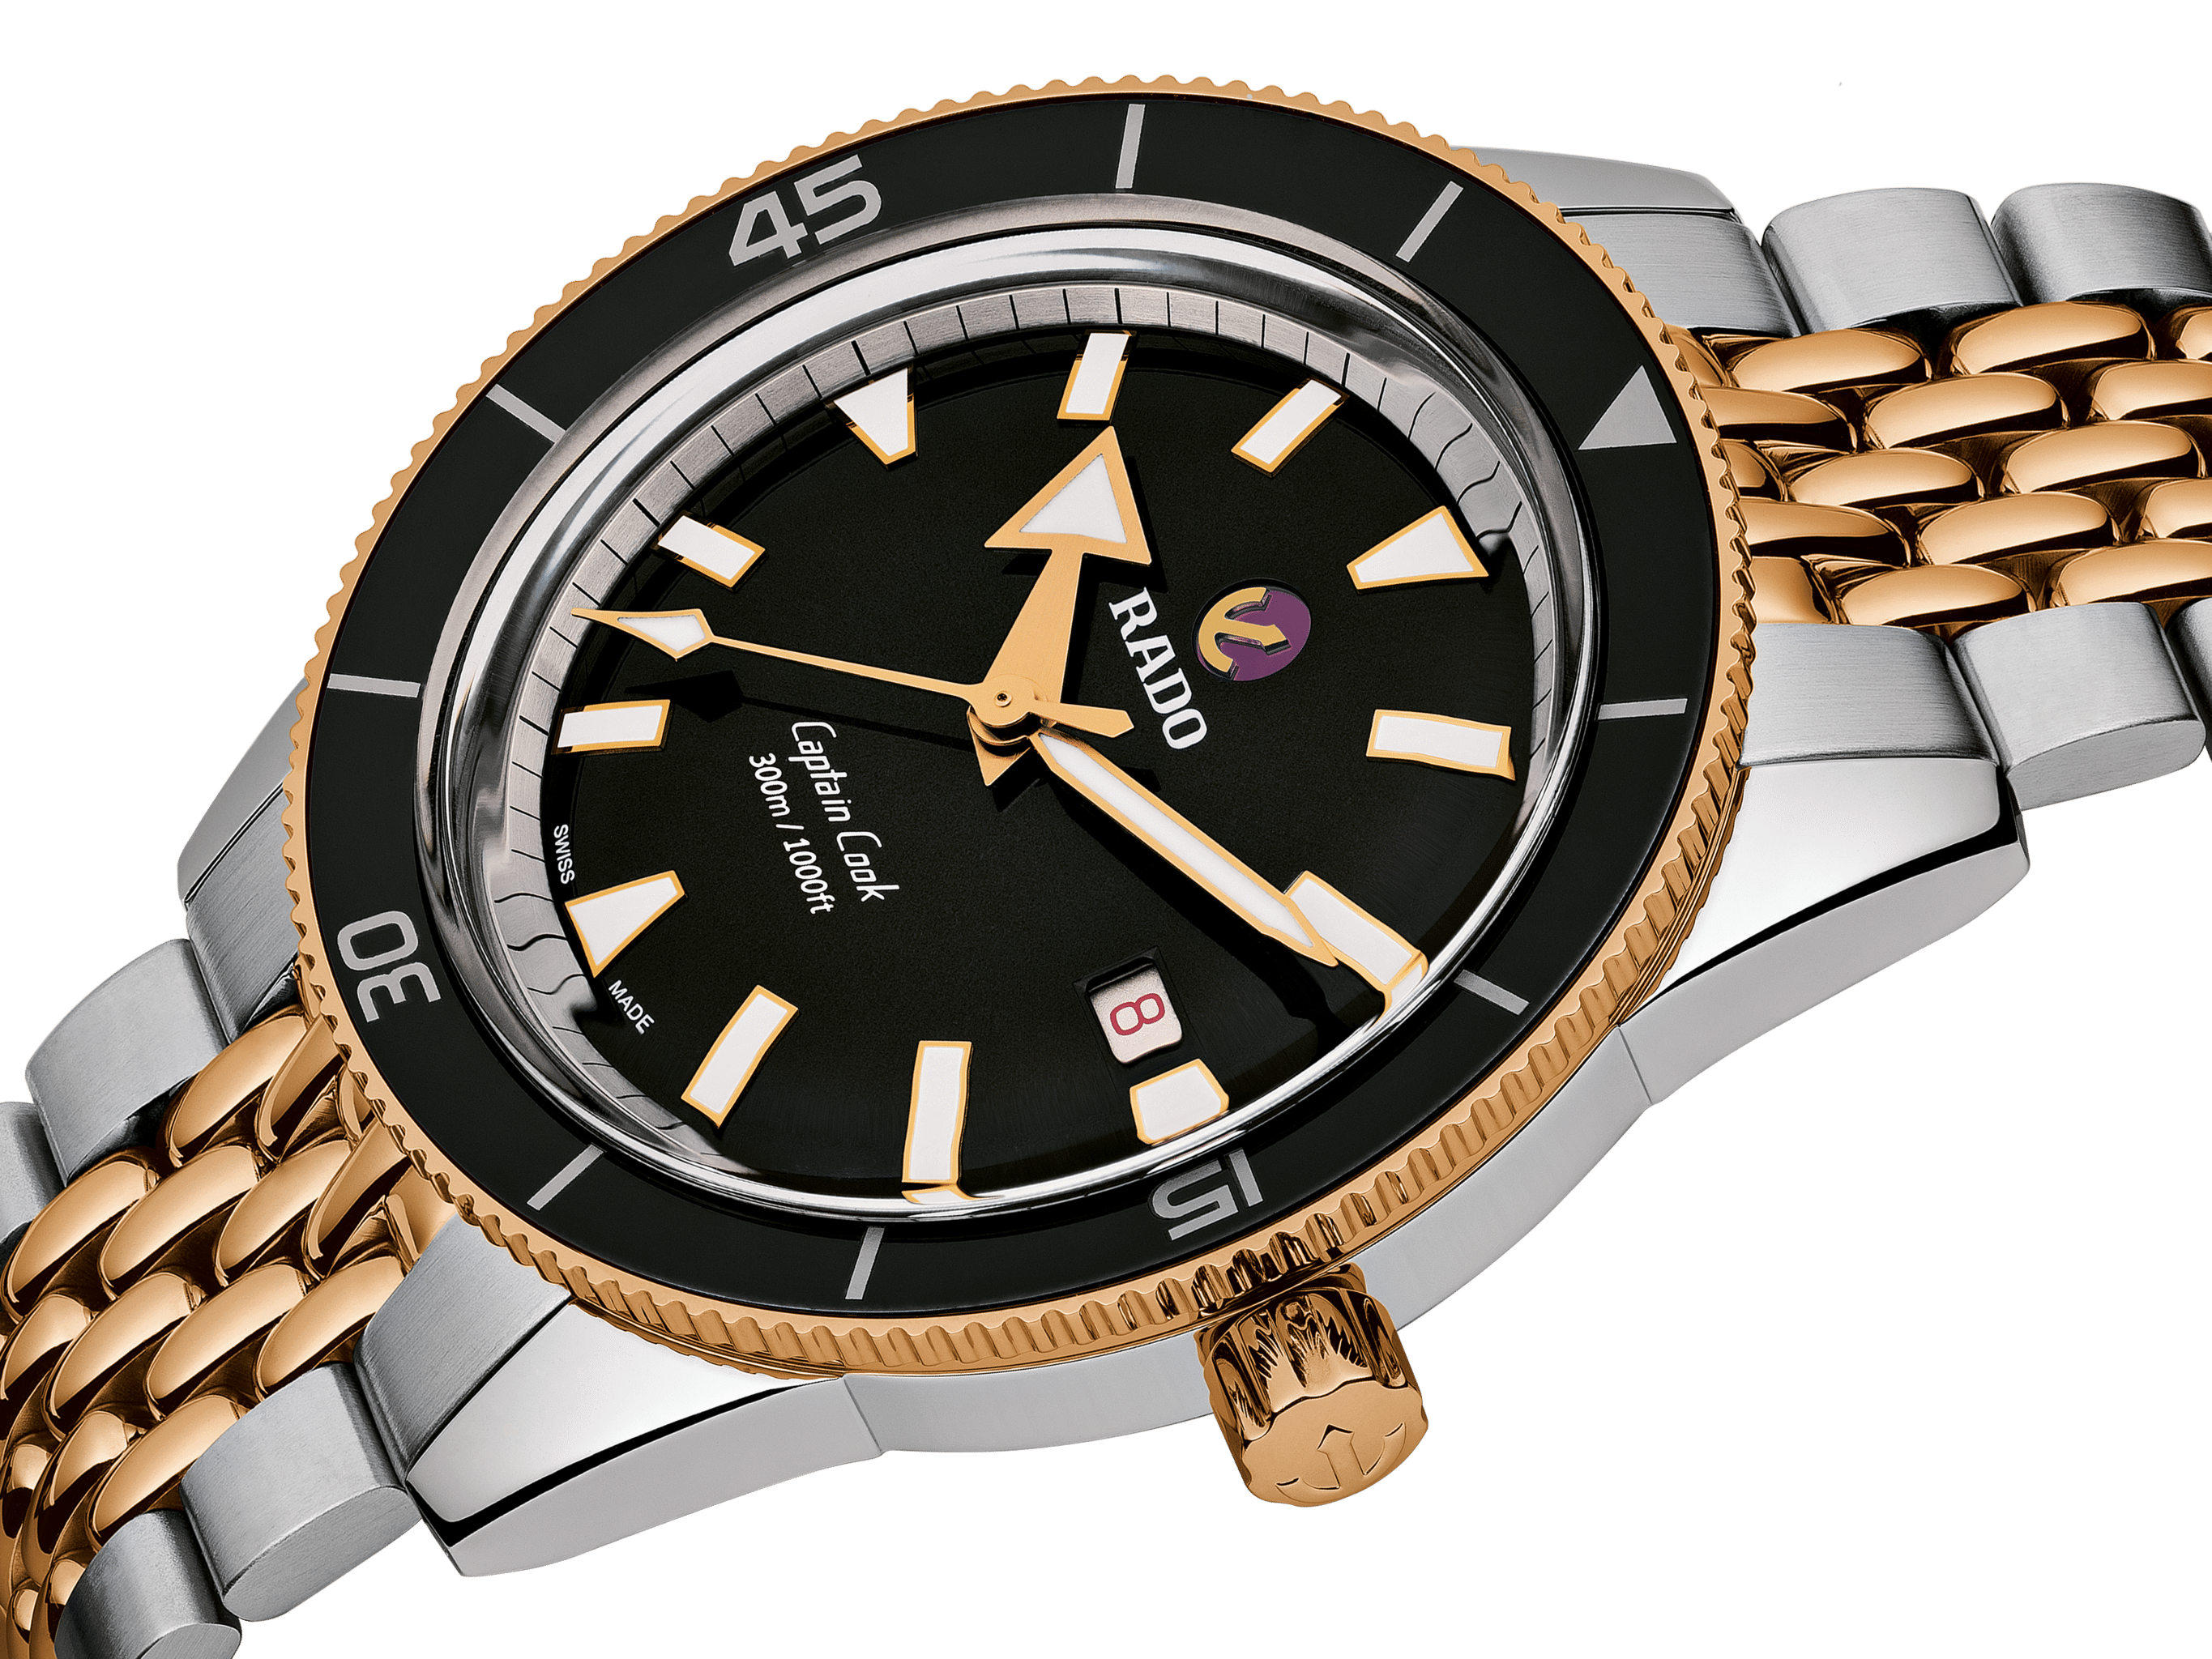 RADO Captain Cook Automatic 42mm Rose-Gold Stainless Steel Men's Watch R32137153